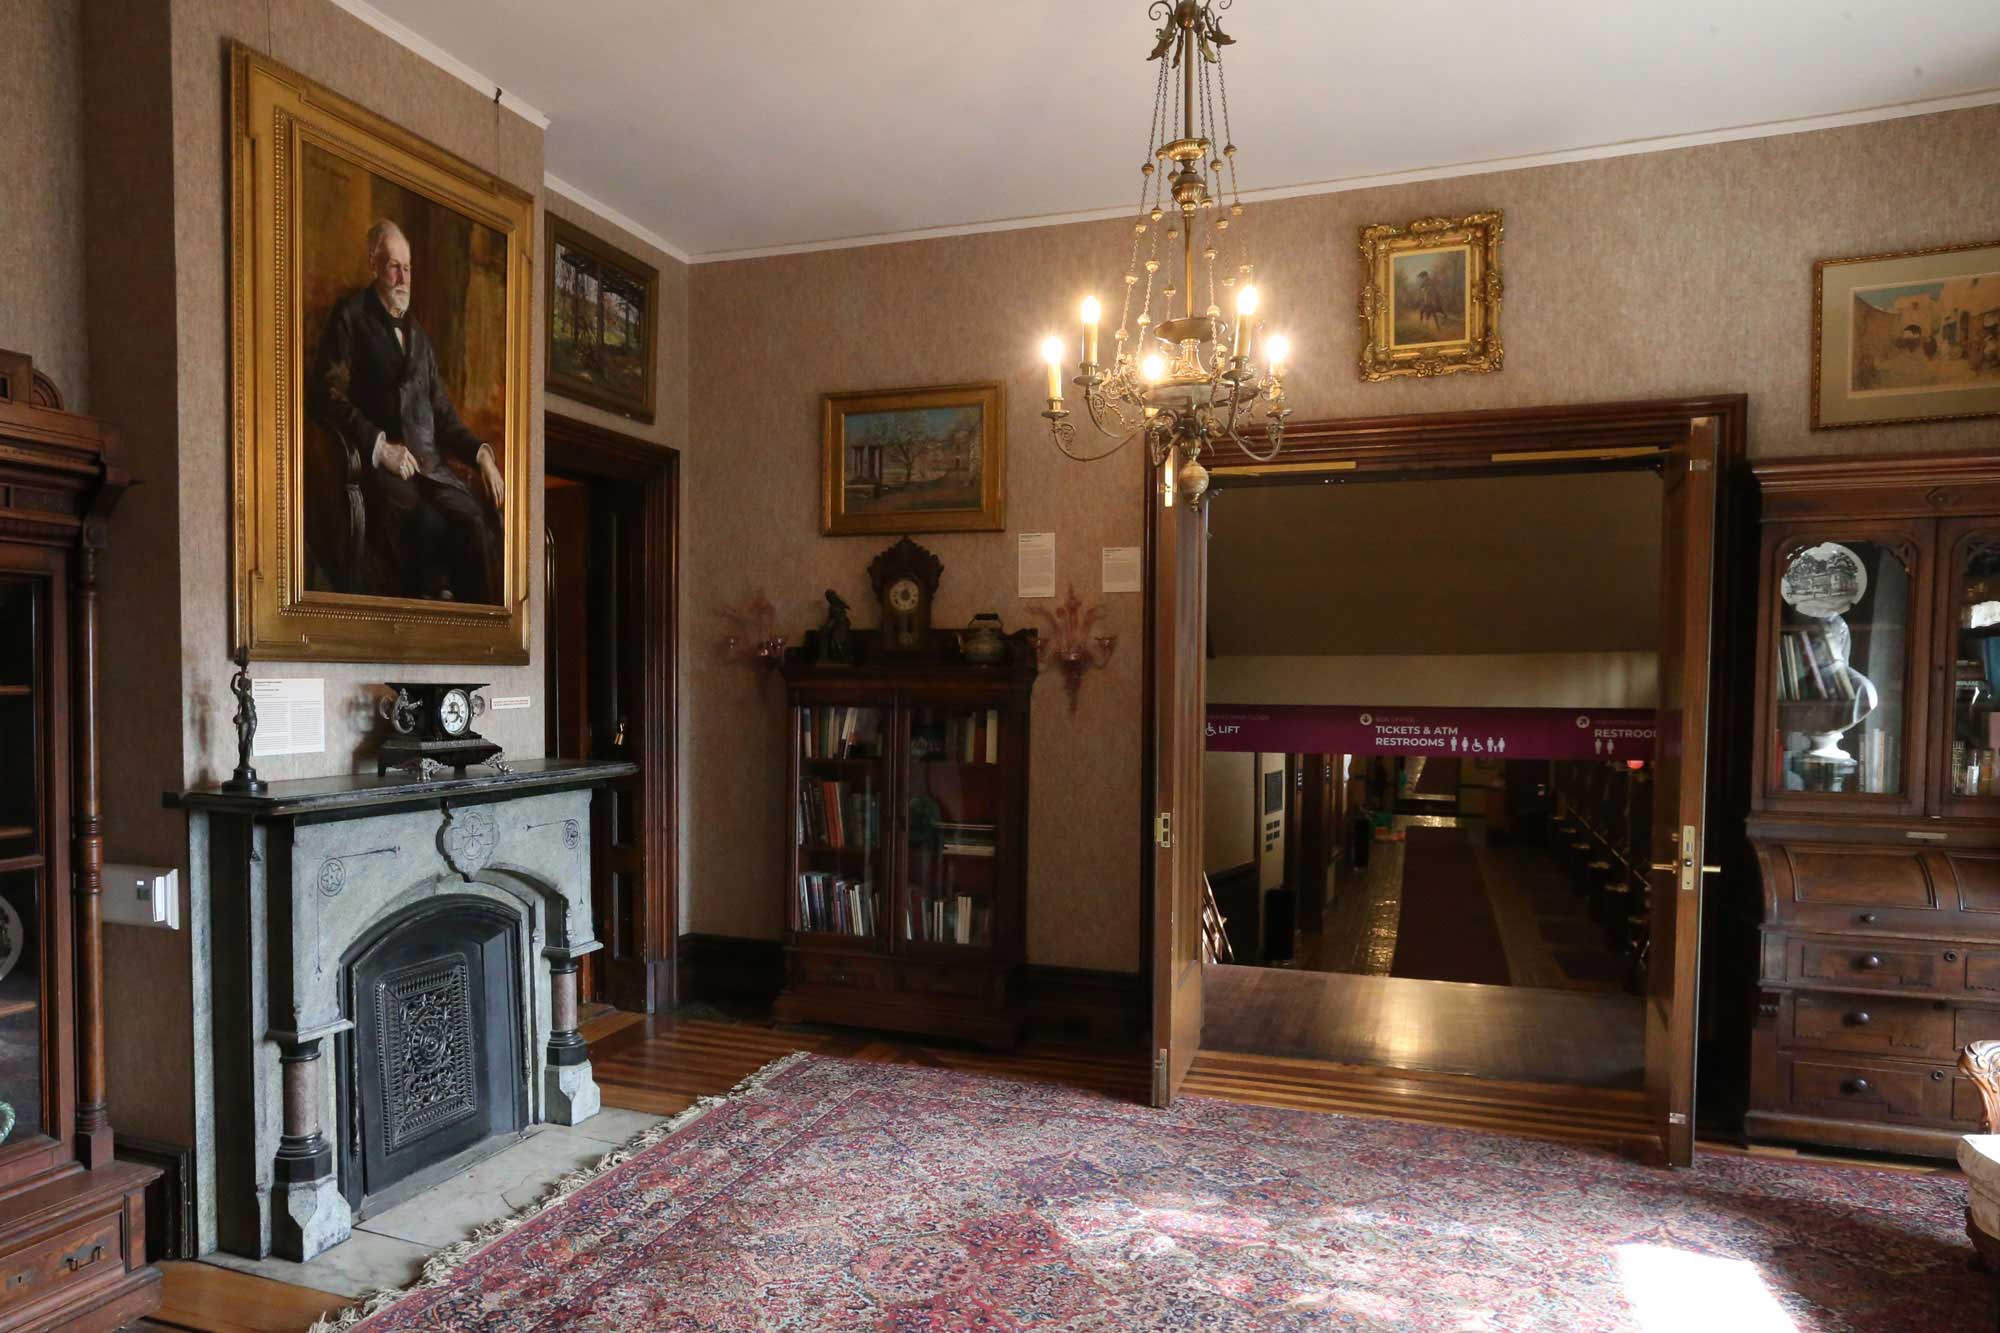 An interior view of the mansion with a dark stone fireplace with a portrait of Hoyt Sherman above the mantle. Double doors are open to reveal the hallway that leads to the theater.